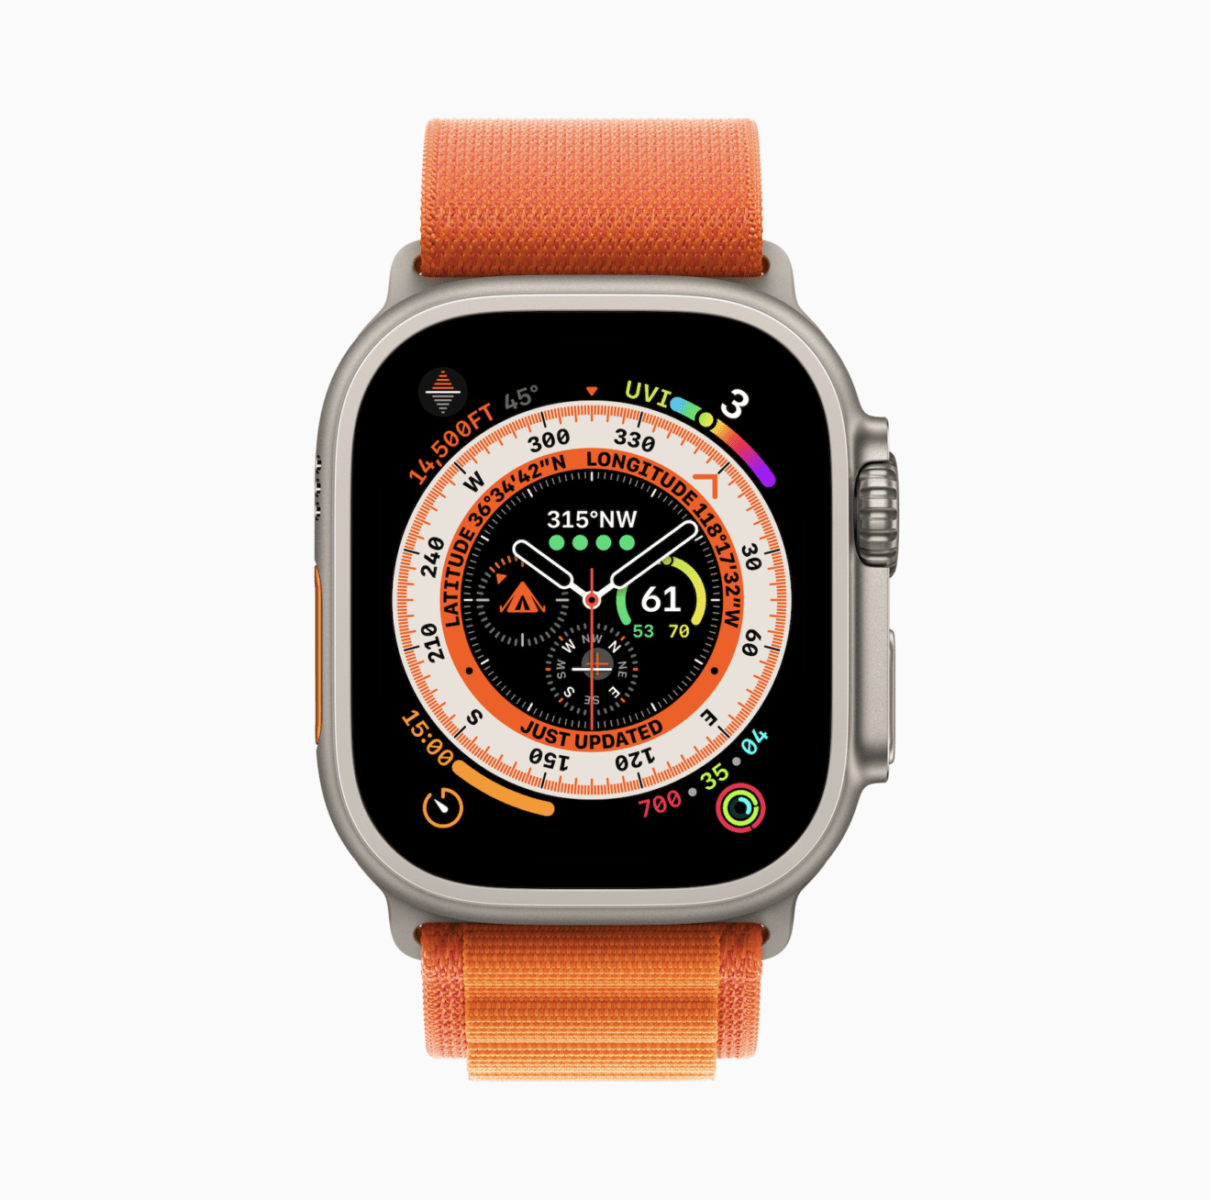 Is the New Apple Watch Ultra Following the Way of Swiss Watchmaking?